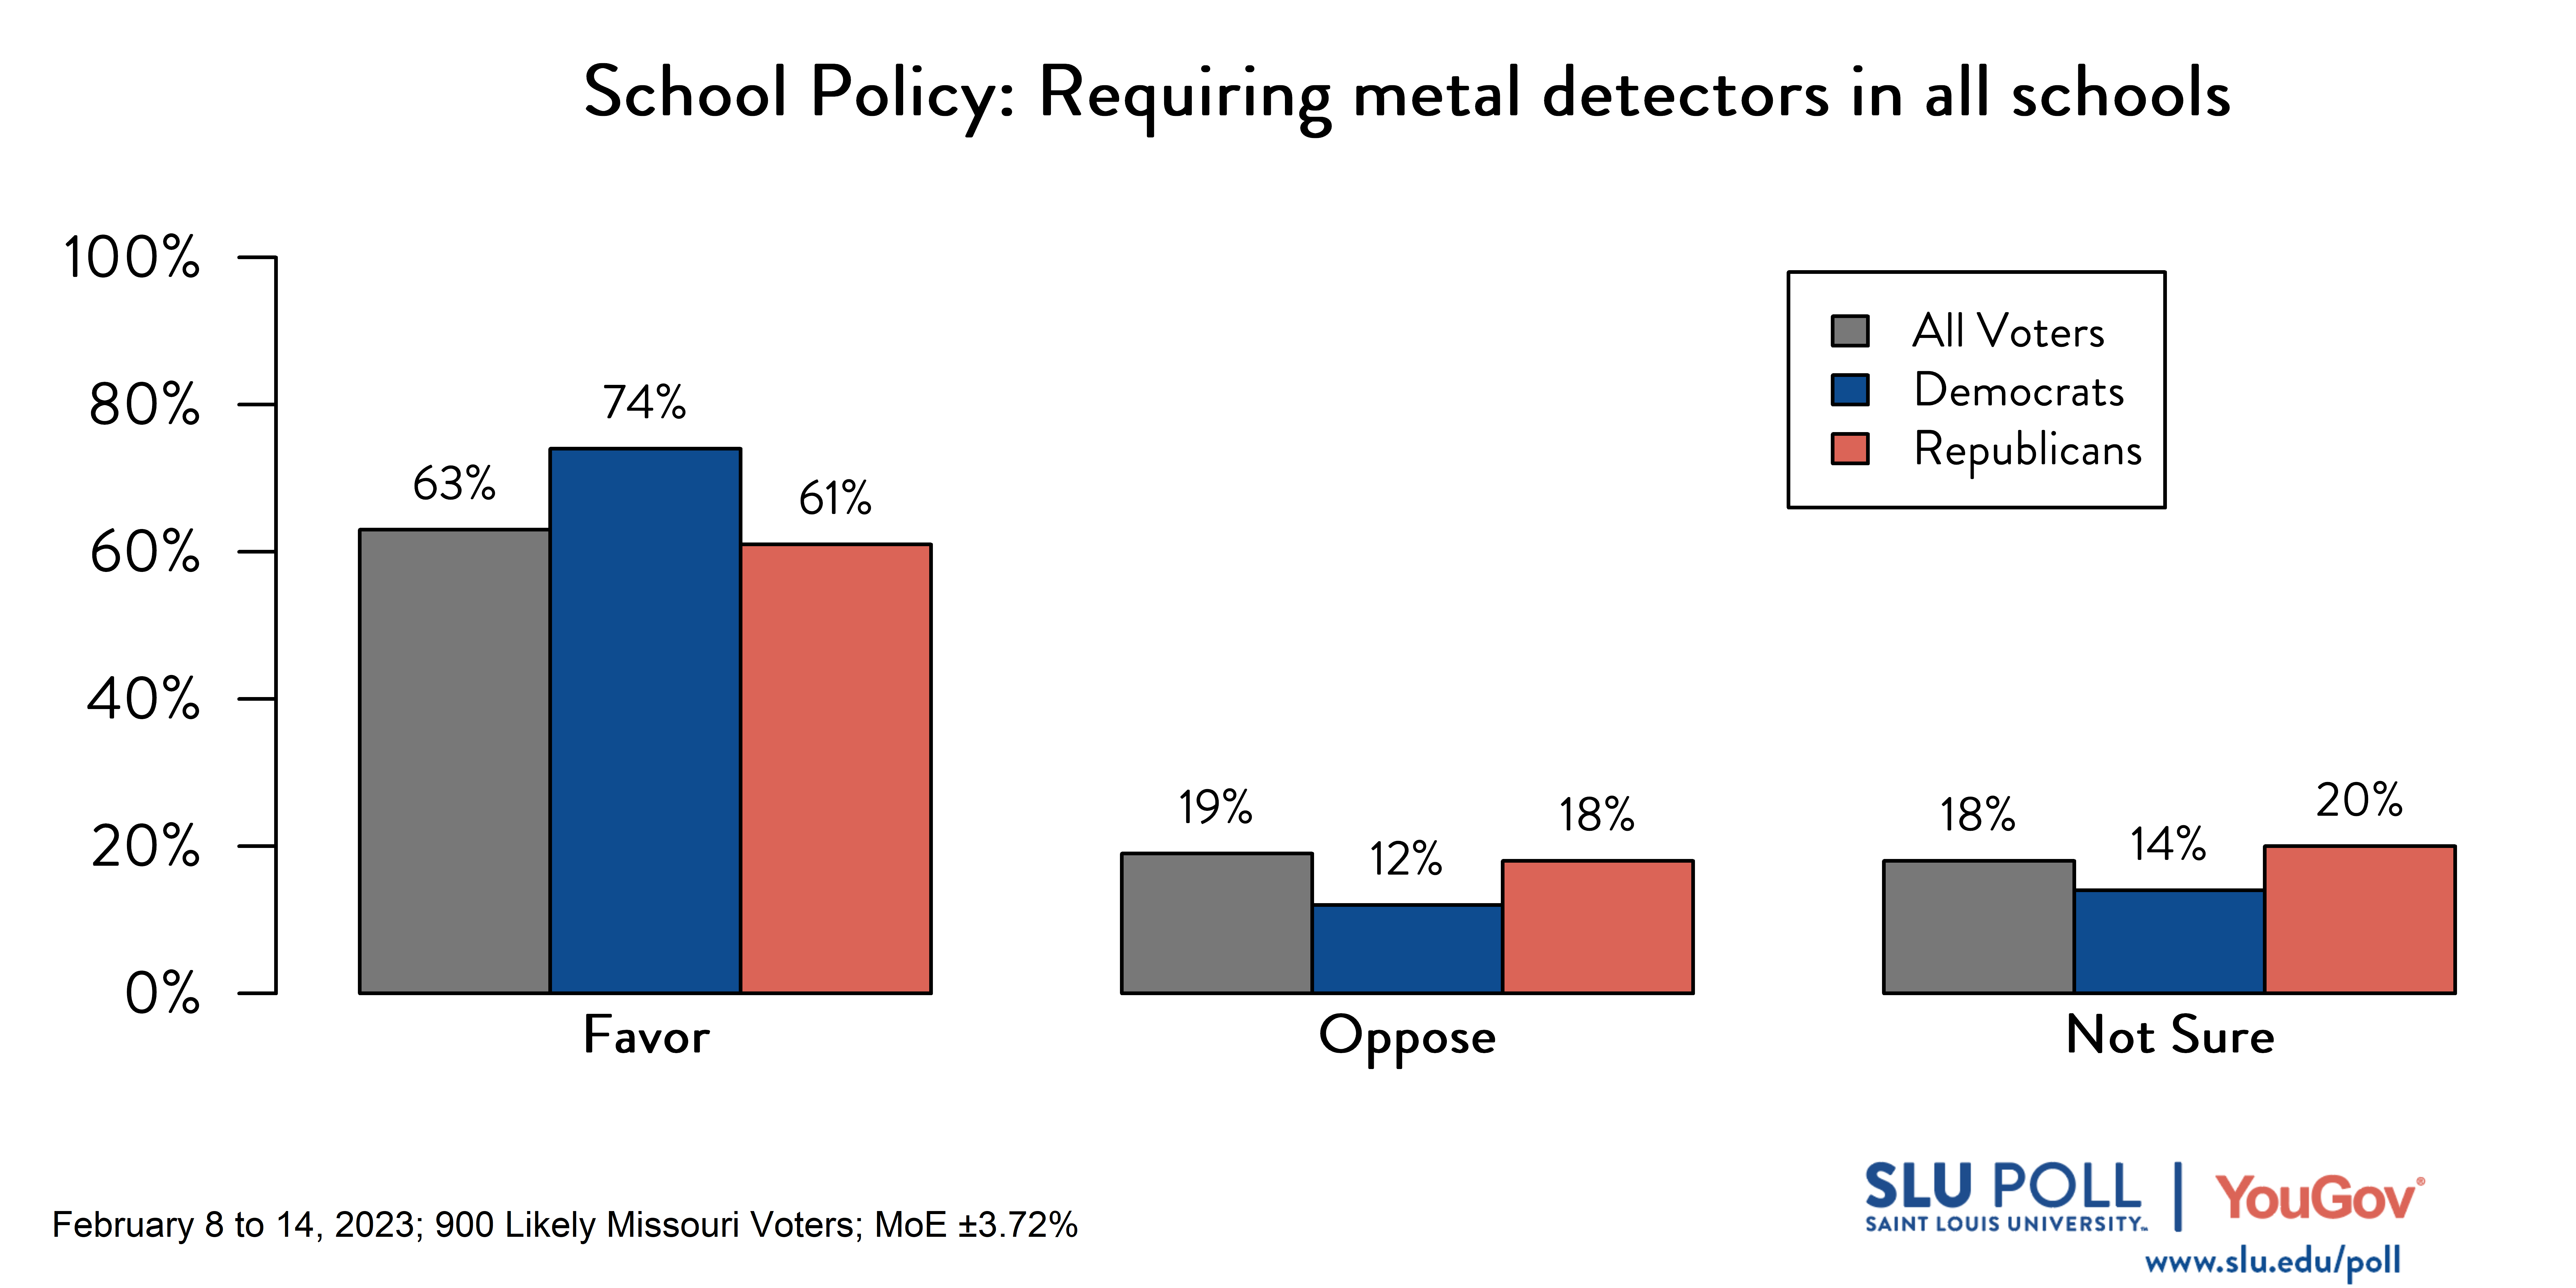 Likely voters' responses to 'Do you favor or oppose the following policies in schools: Requiring metal detectors in all schools?': 63% Favor, 19% Oppose, and 18% Not sure. Democratic voters' responses: ' 74% Favor, 12% Oppose, and 14% Not sure. Republican voters' responses: 61% Favor, 18% Oppose, and 20% Not sure.